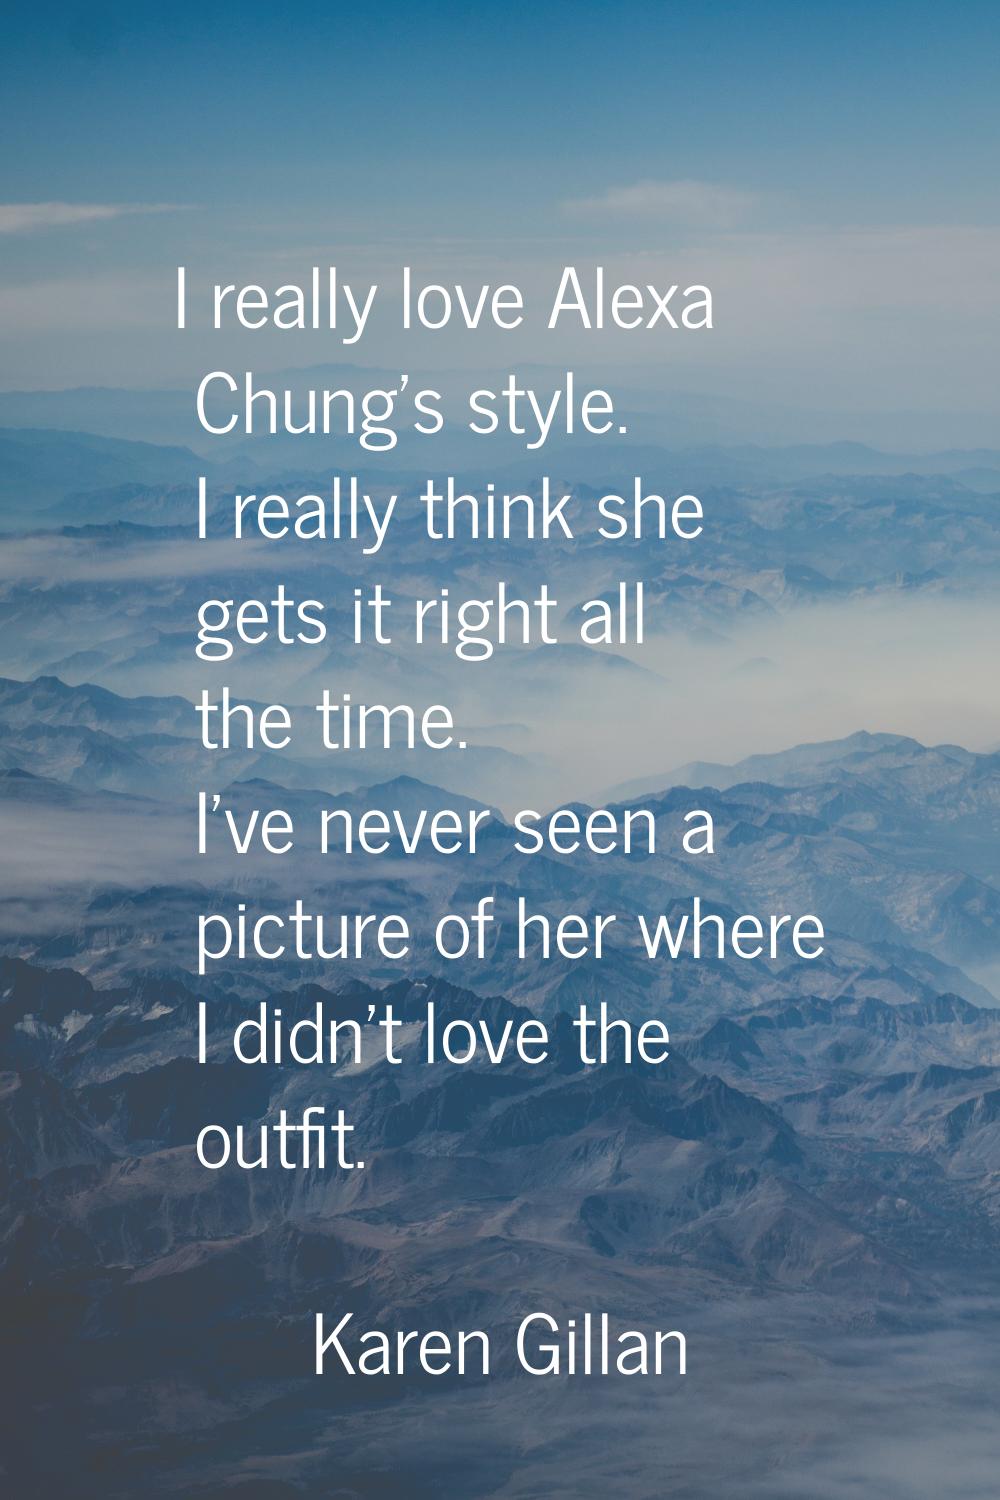 I really love Alexa Chung's style. I really think she gets it right all the time. I've never seen a